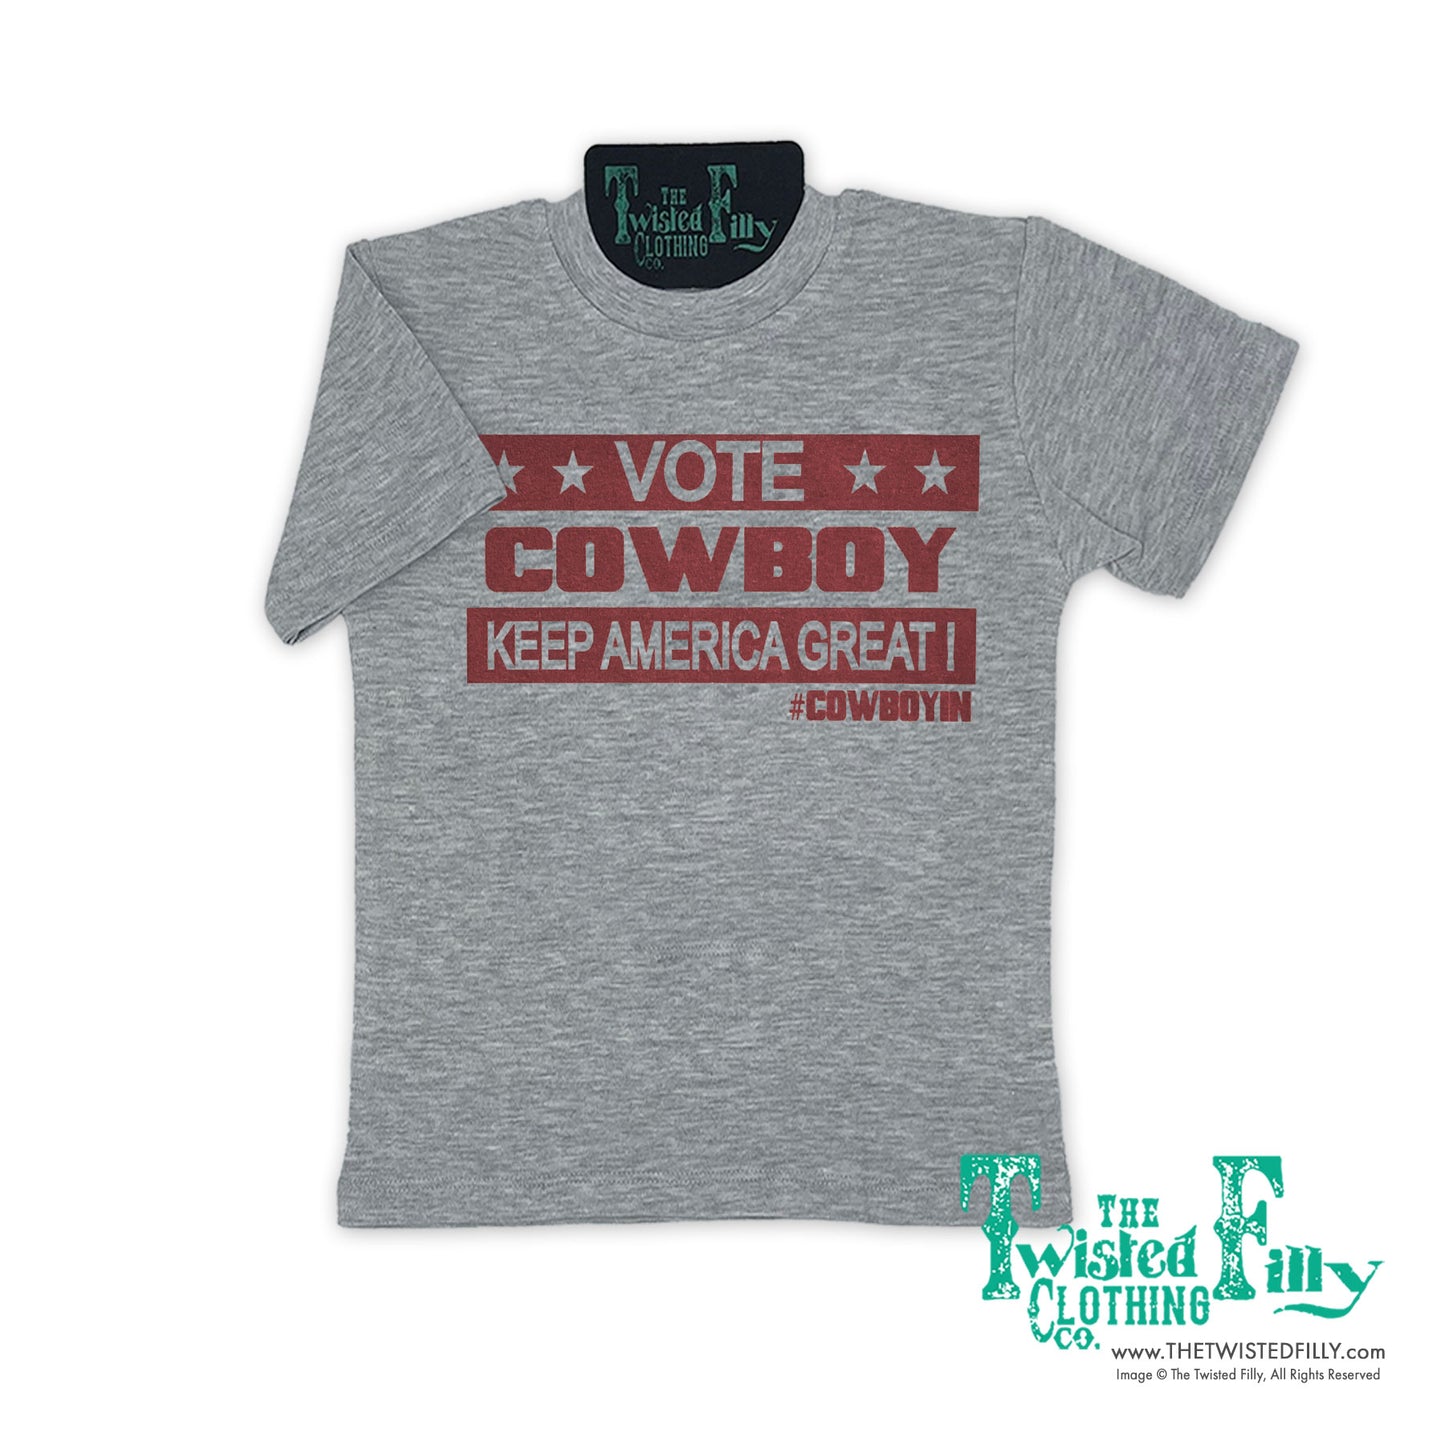 Vote Cowboy Keep America Great! - S/S Youth Tee - Assorted Colors